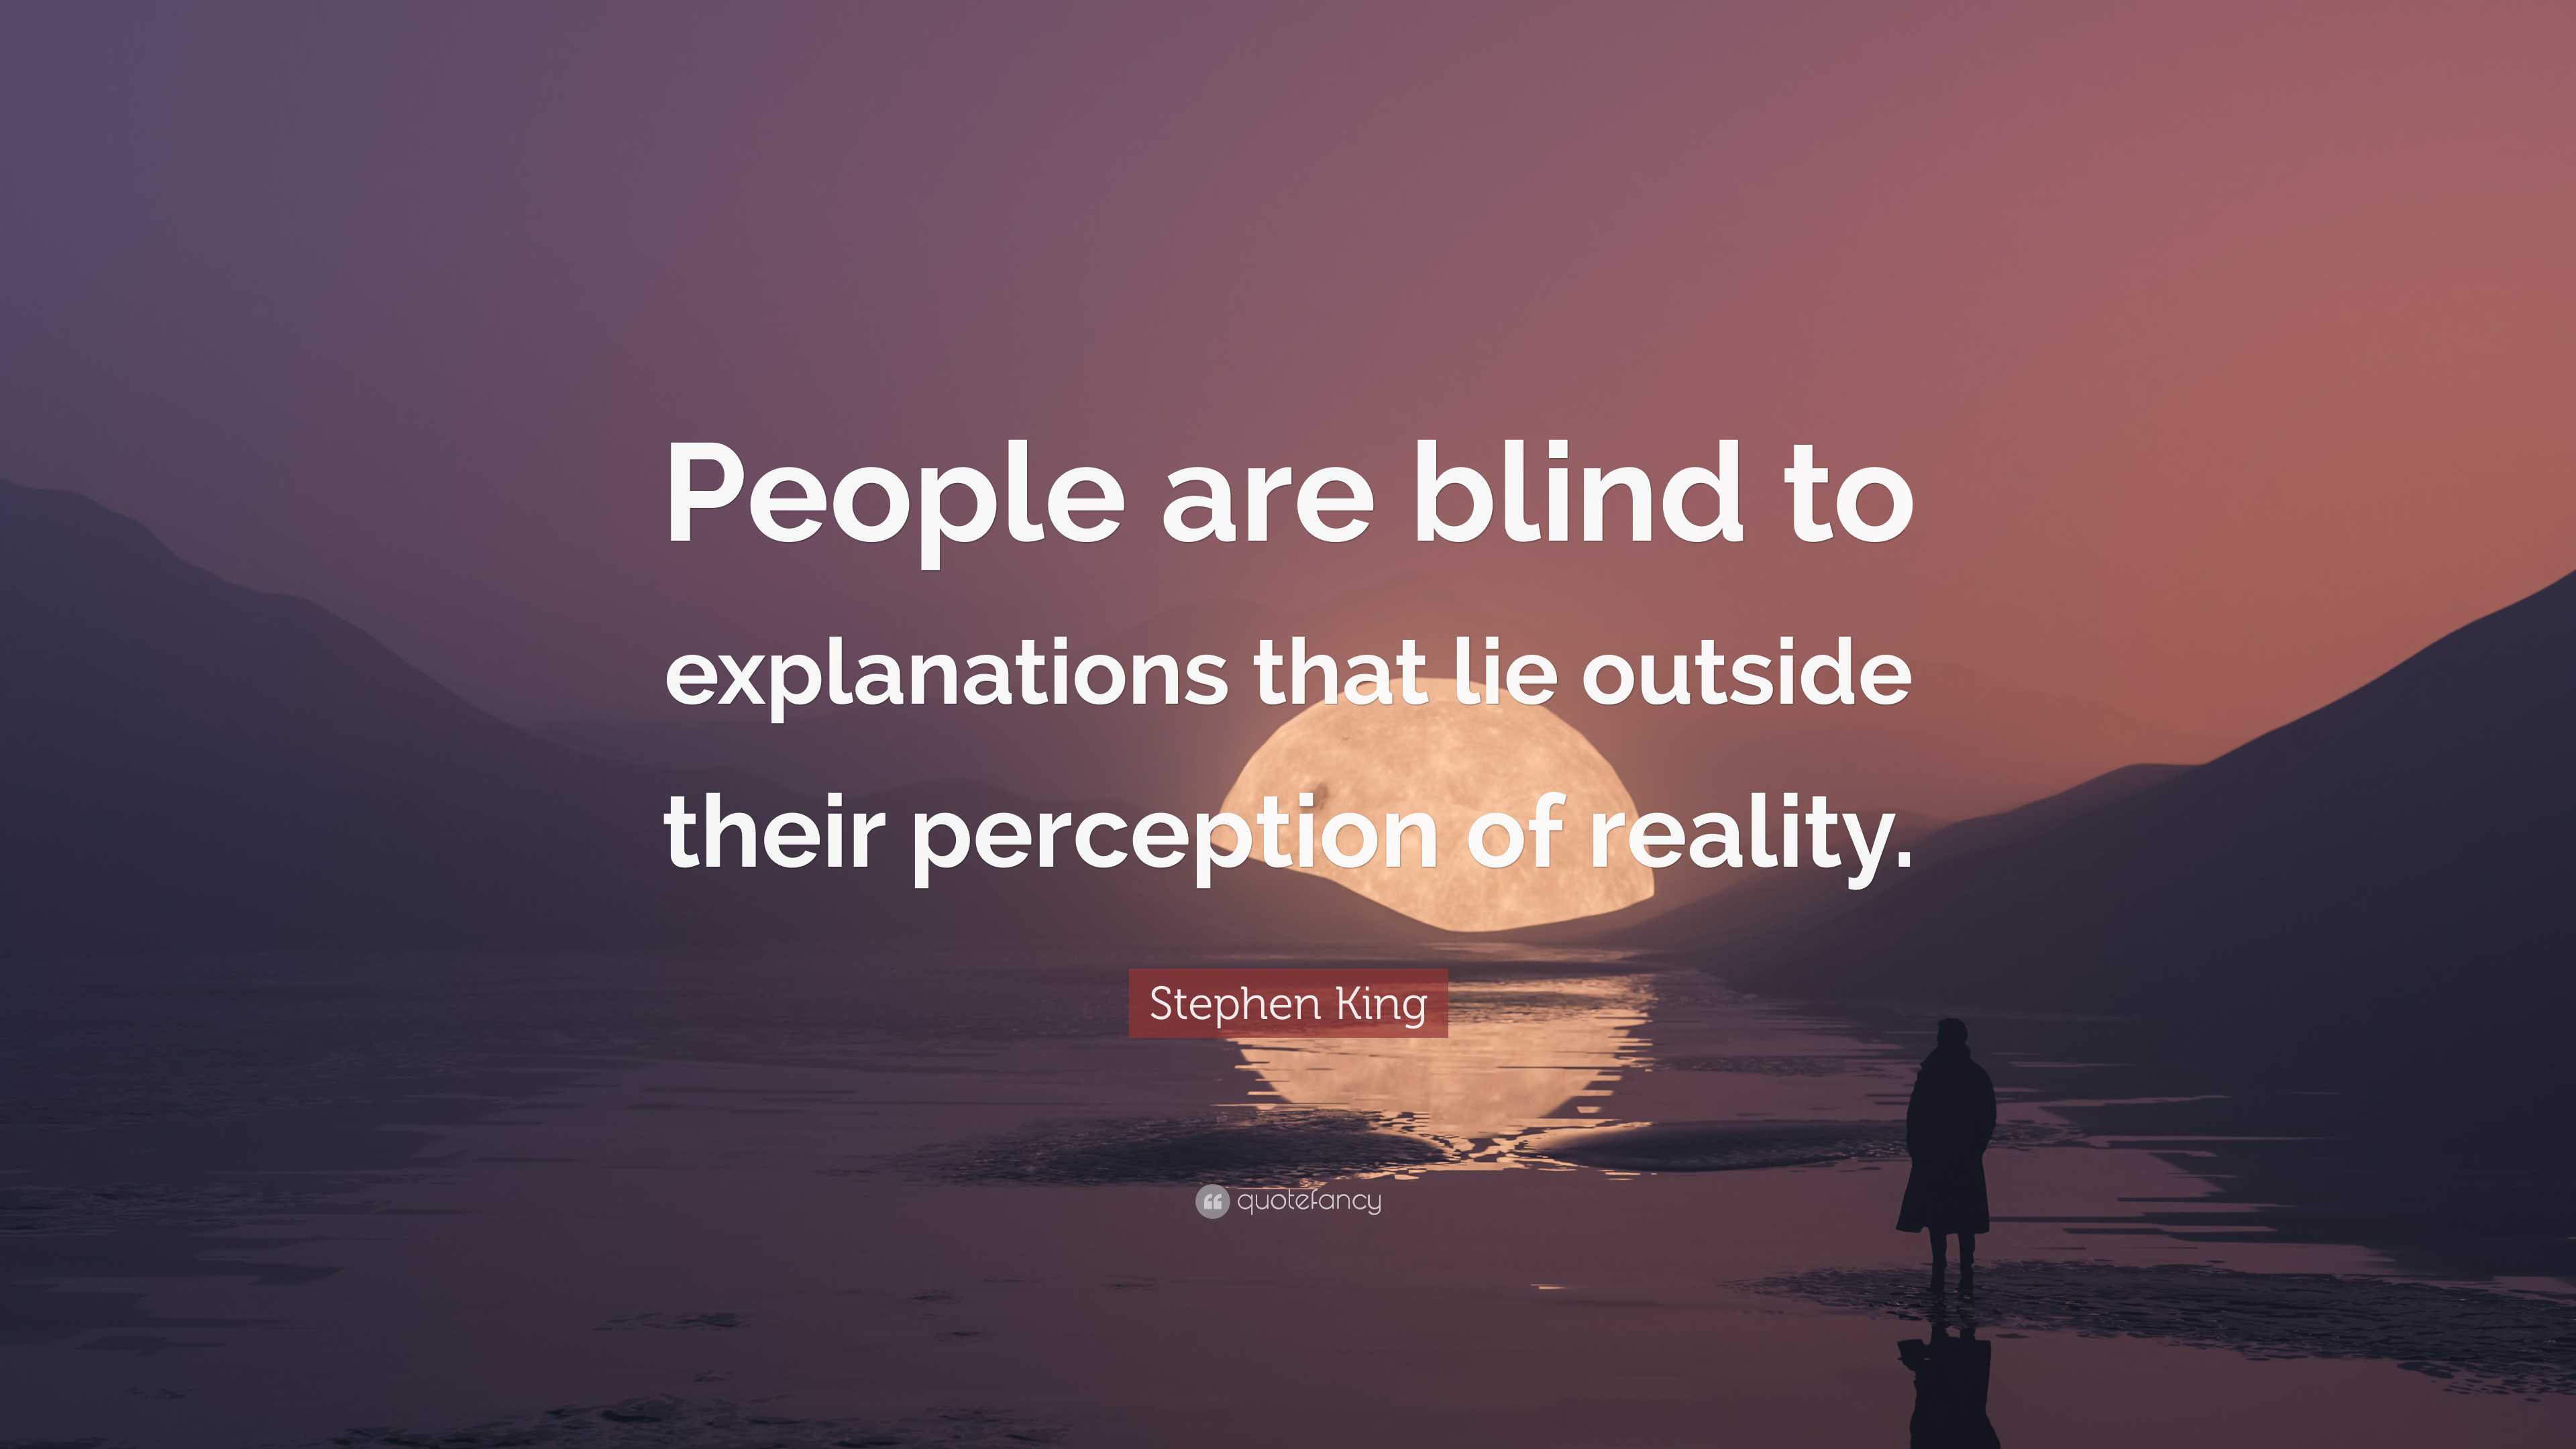 Stephen King Quote: “People are blind to explanations that lie outside ...